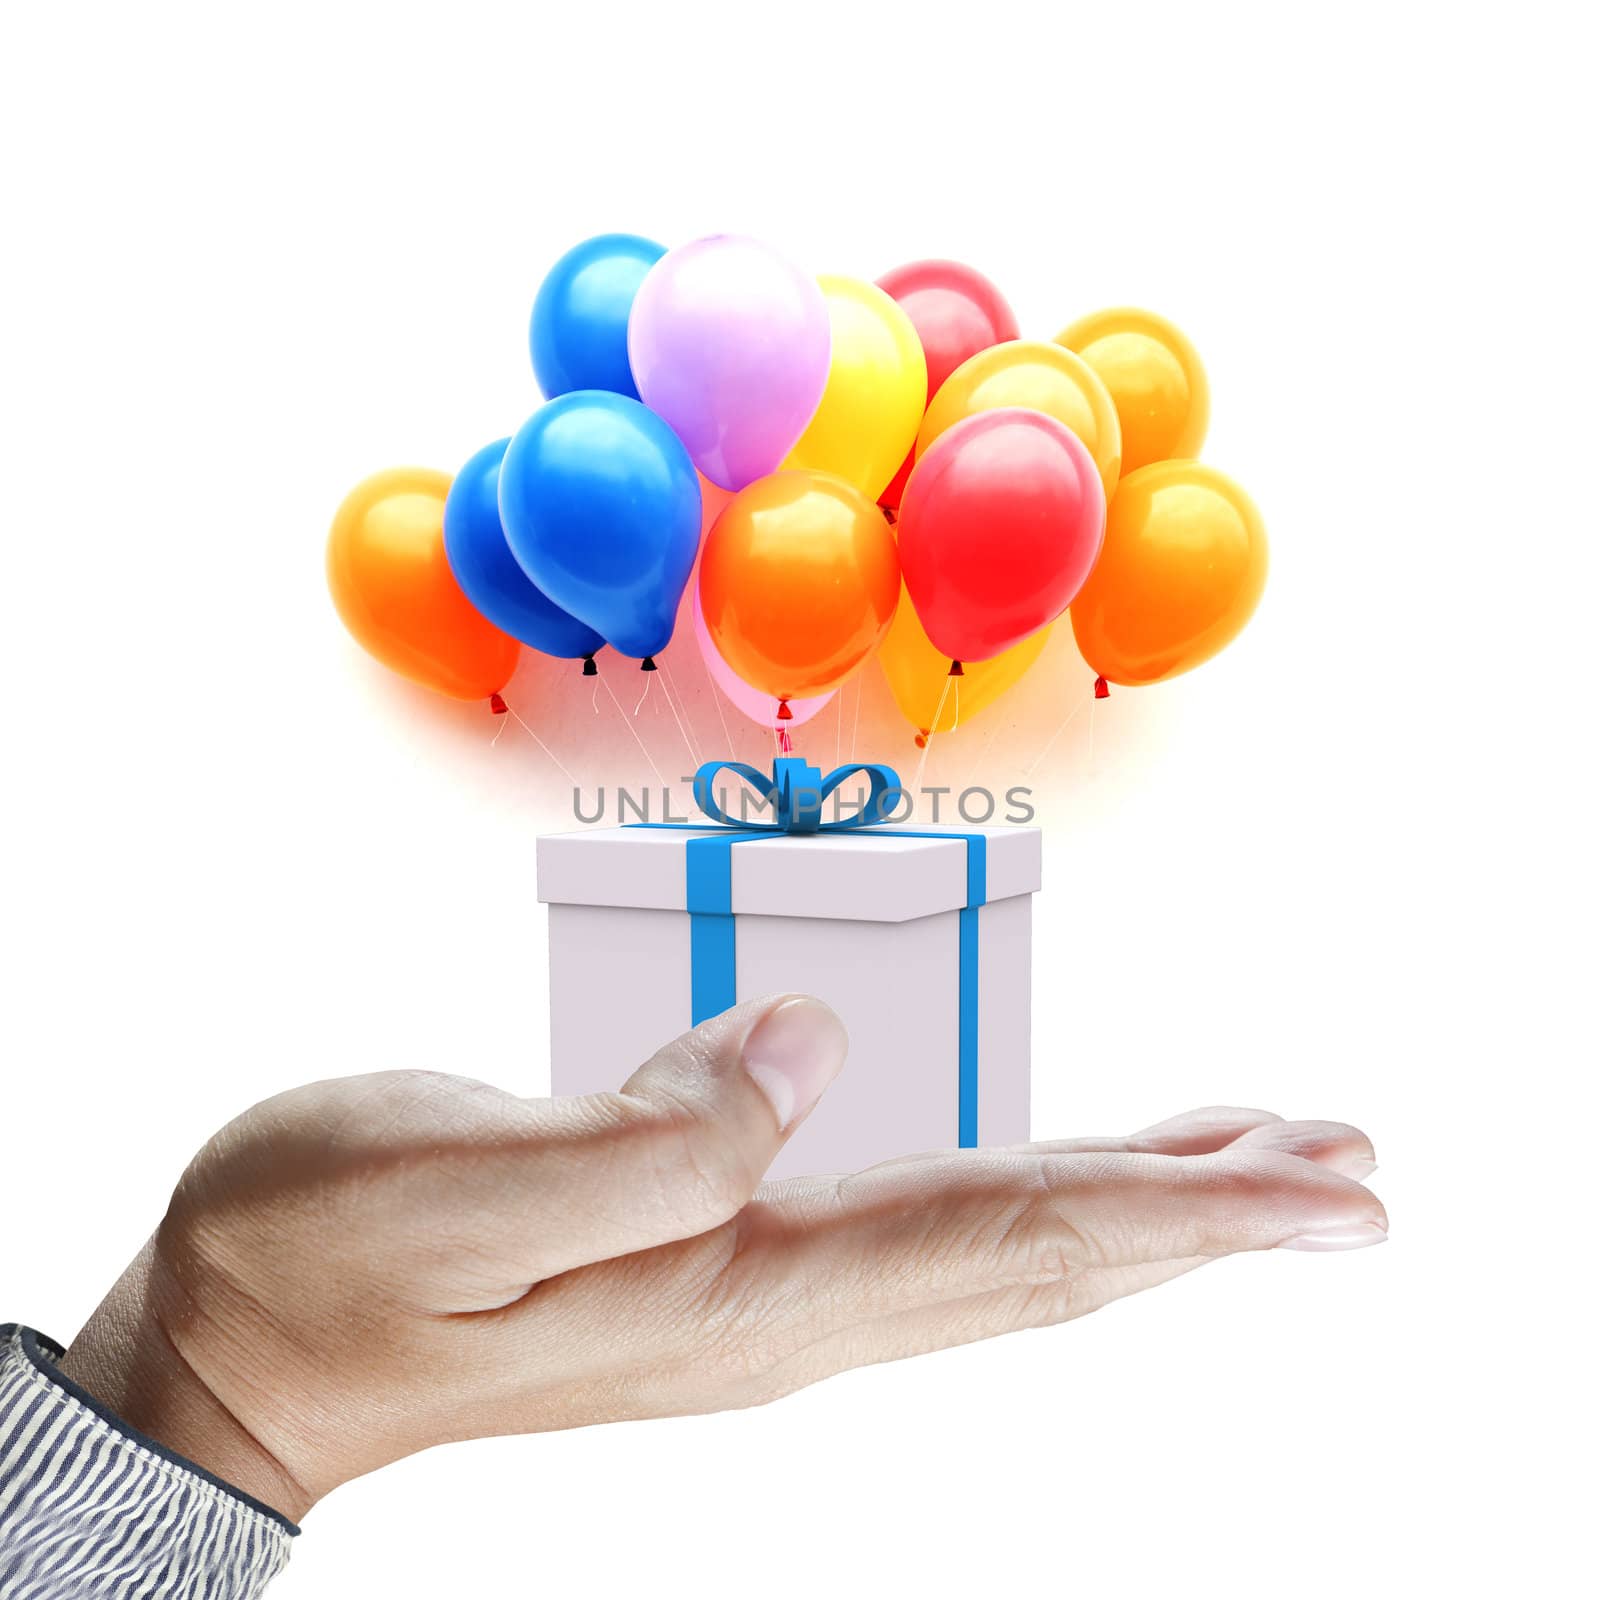 Hands holding gift in package with blue ribbon and colorful ball by buchachon